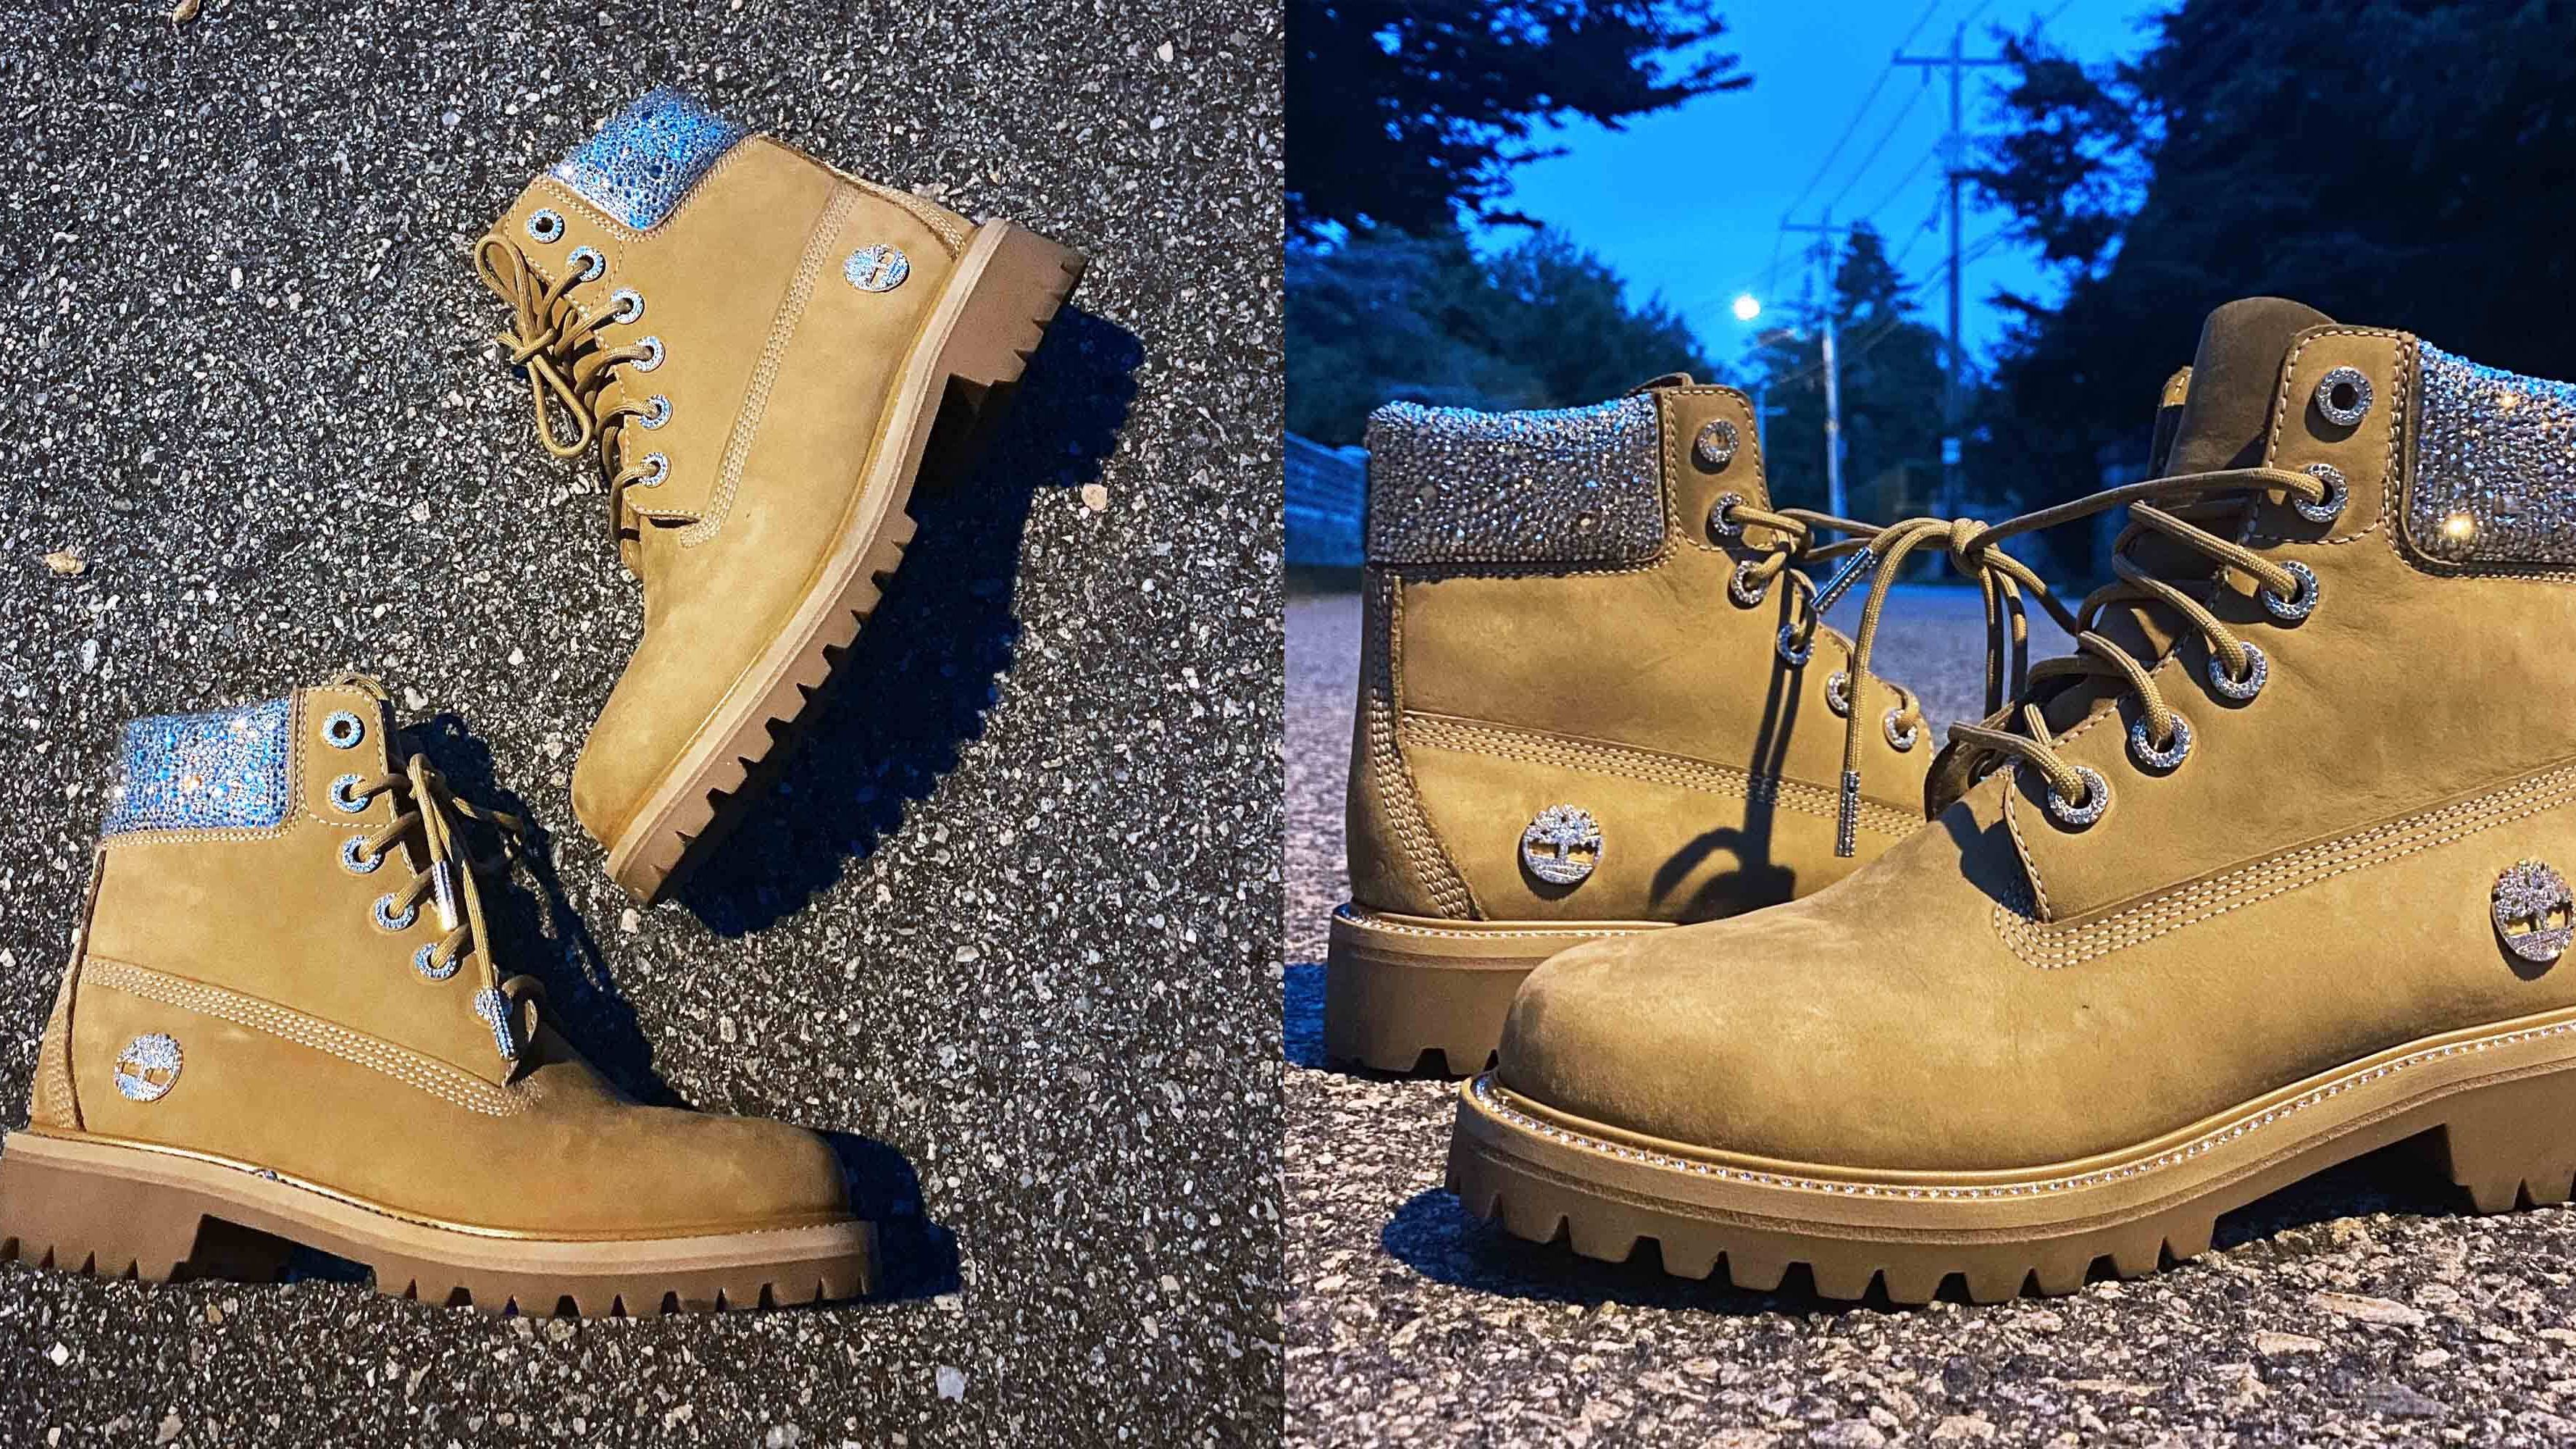 Konijn Aanbod Wrok Jimmy Choo x Timberland Sparkly Boots Are Finally Here | Marie Claire